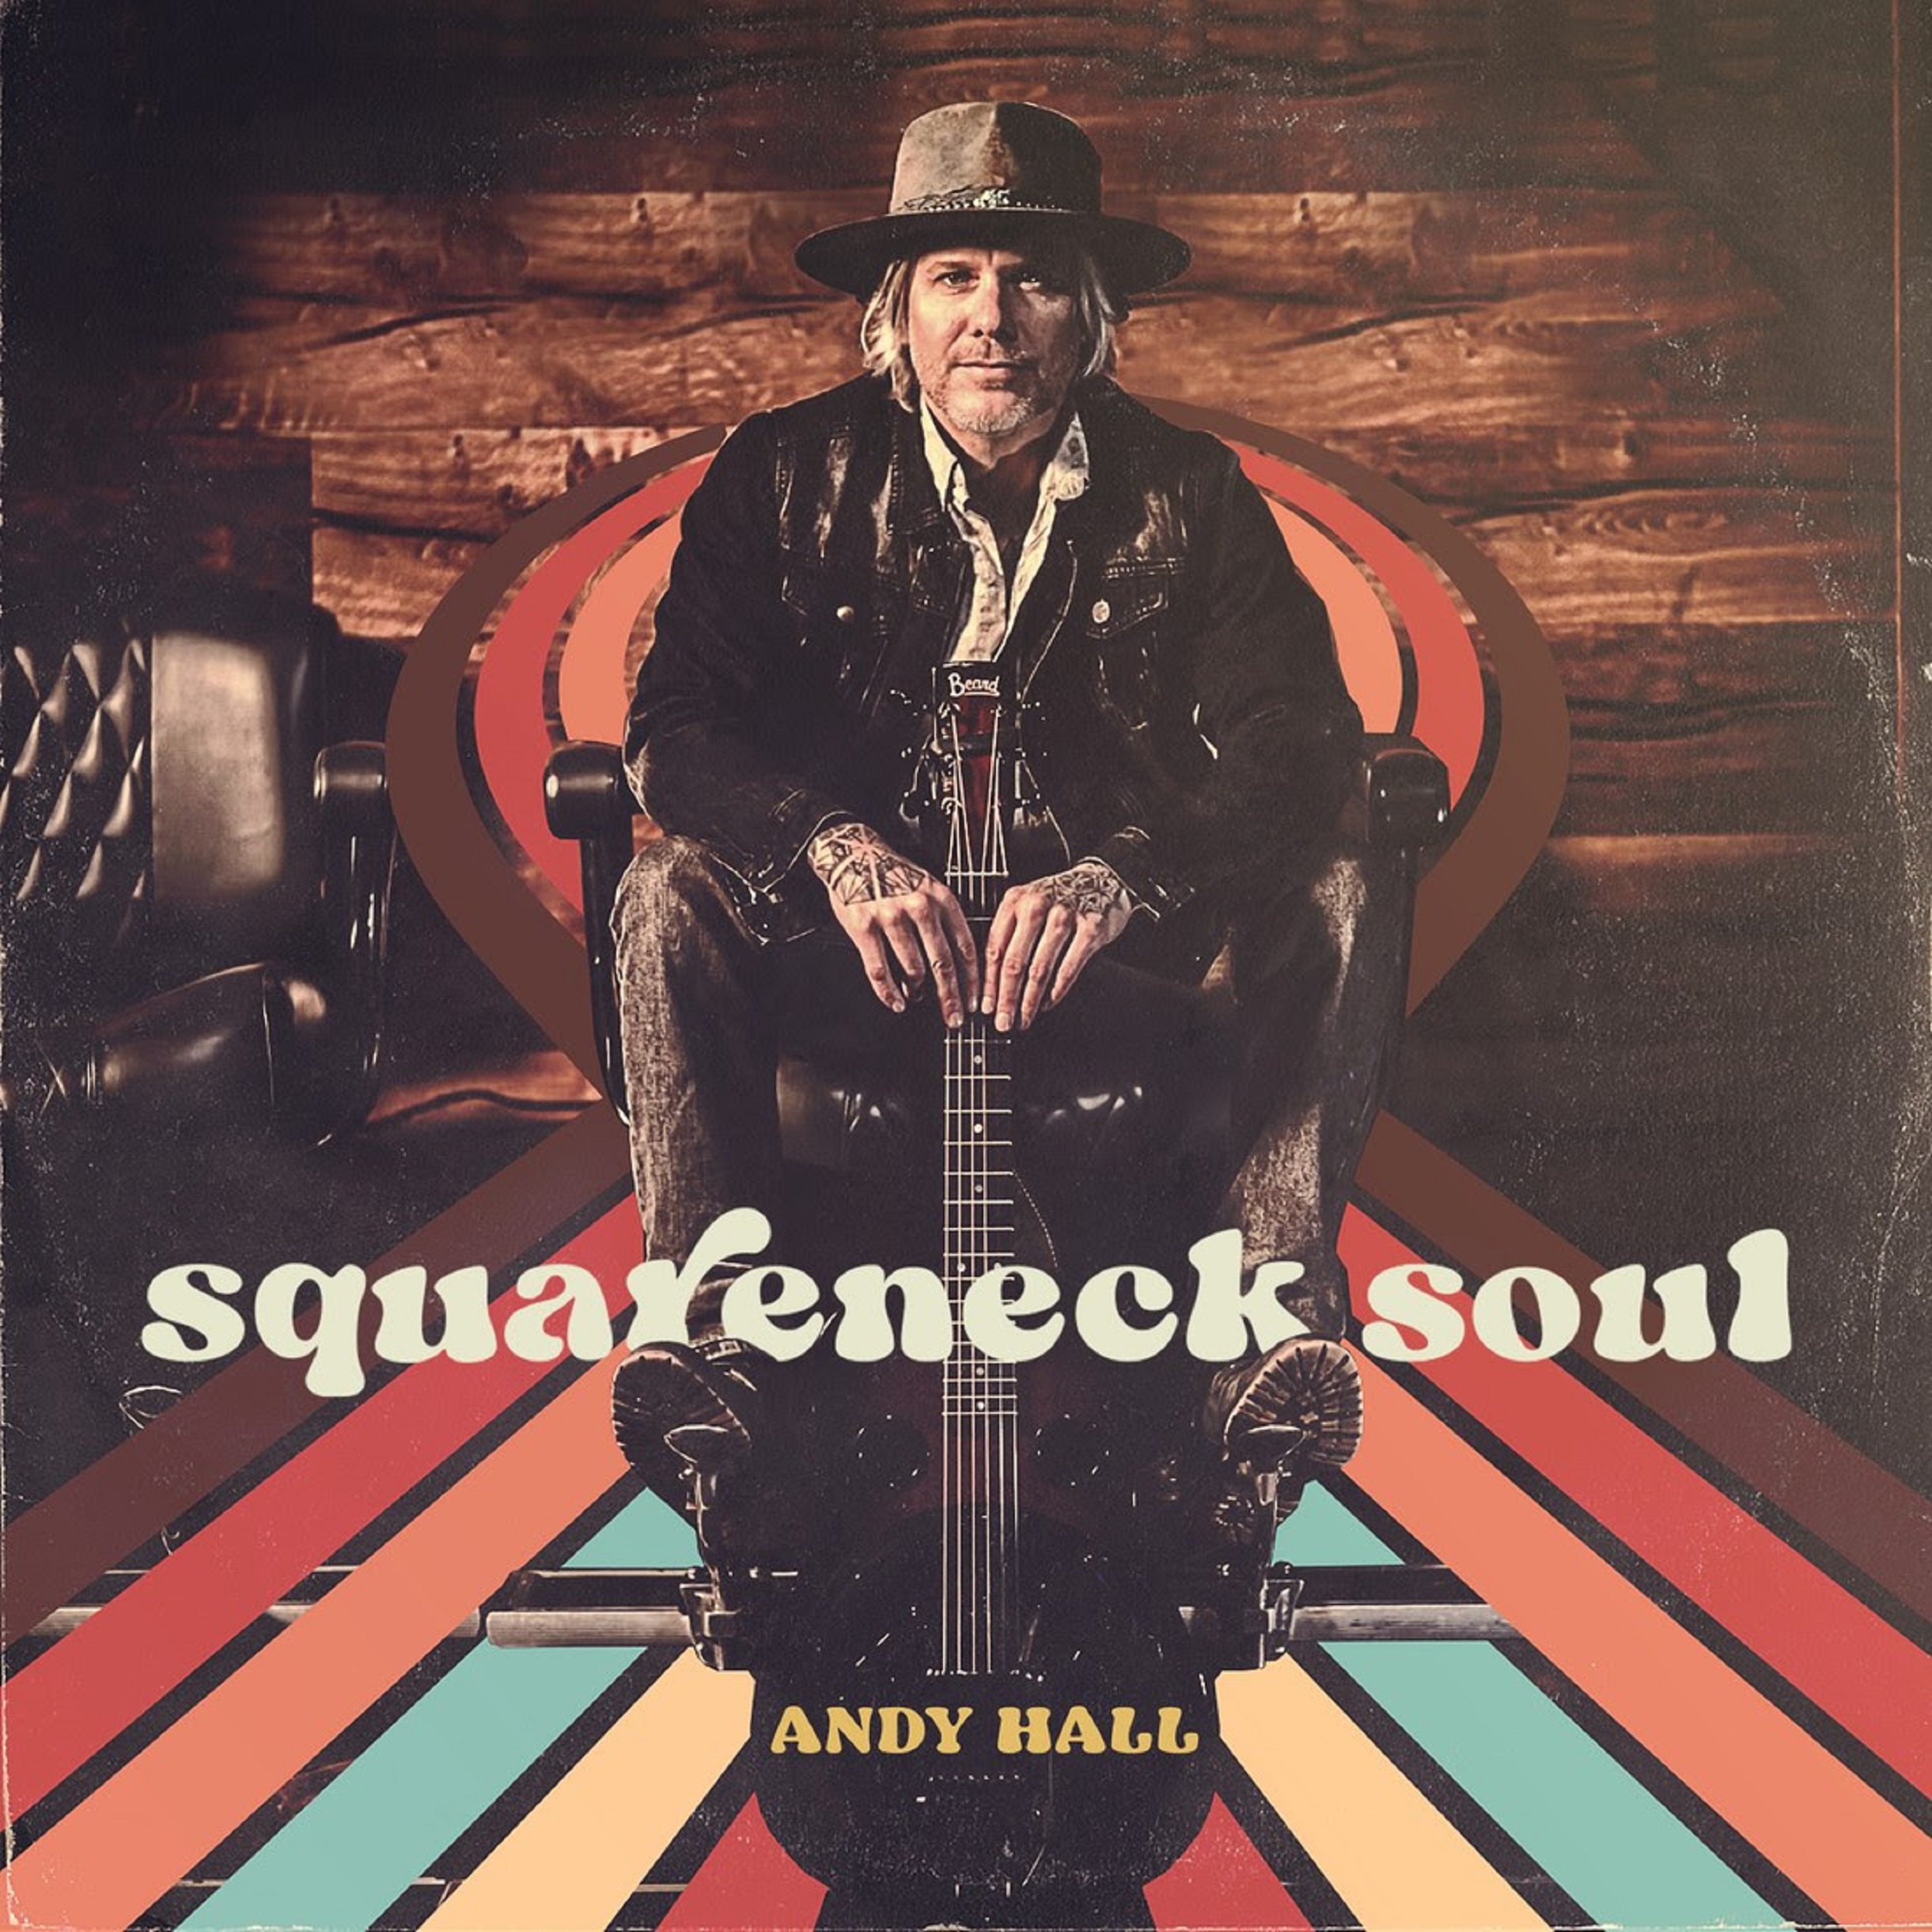 Andy Hall Releases New Album 'Squareneck Soul' ft. Travis Book, Sierra Hull & Wes Corbett